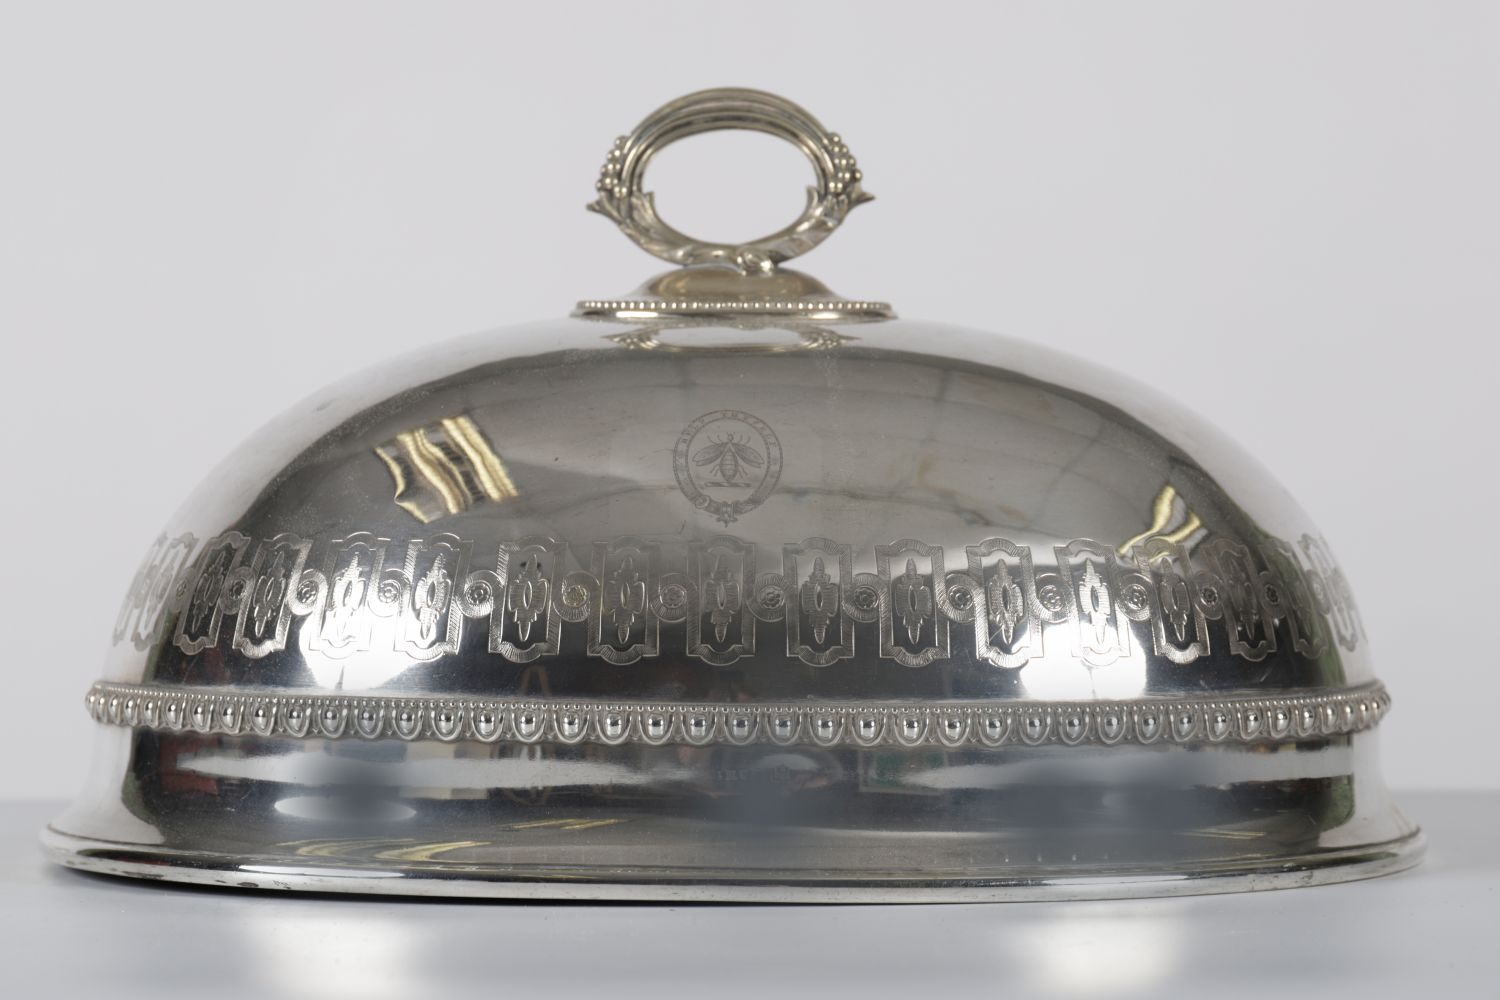 GEORGE III CRESTED SHEFFIELD-PLATED MEAT COVER